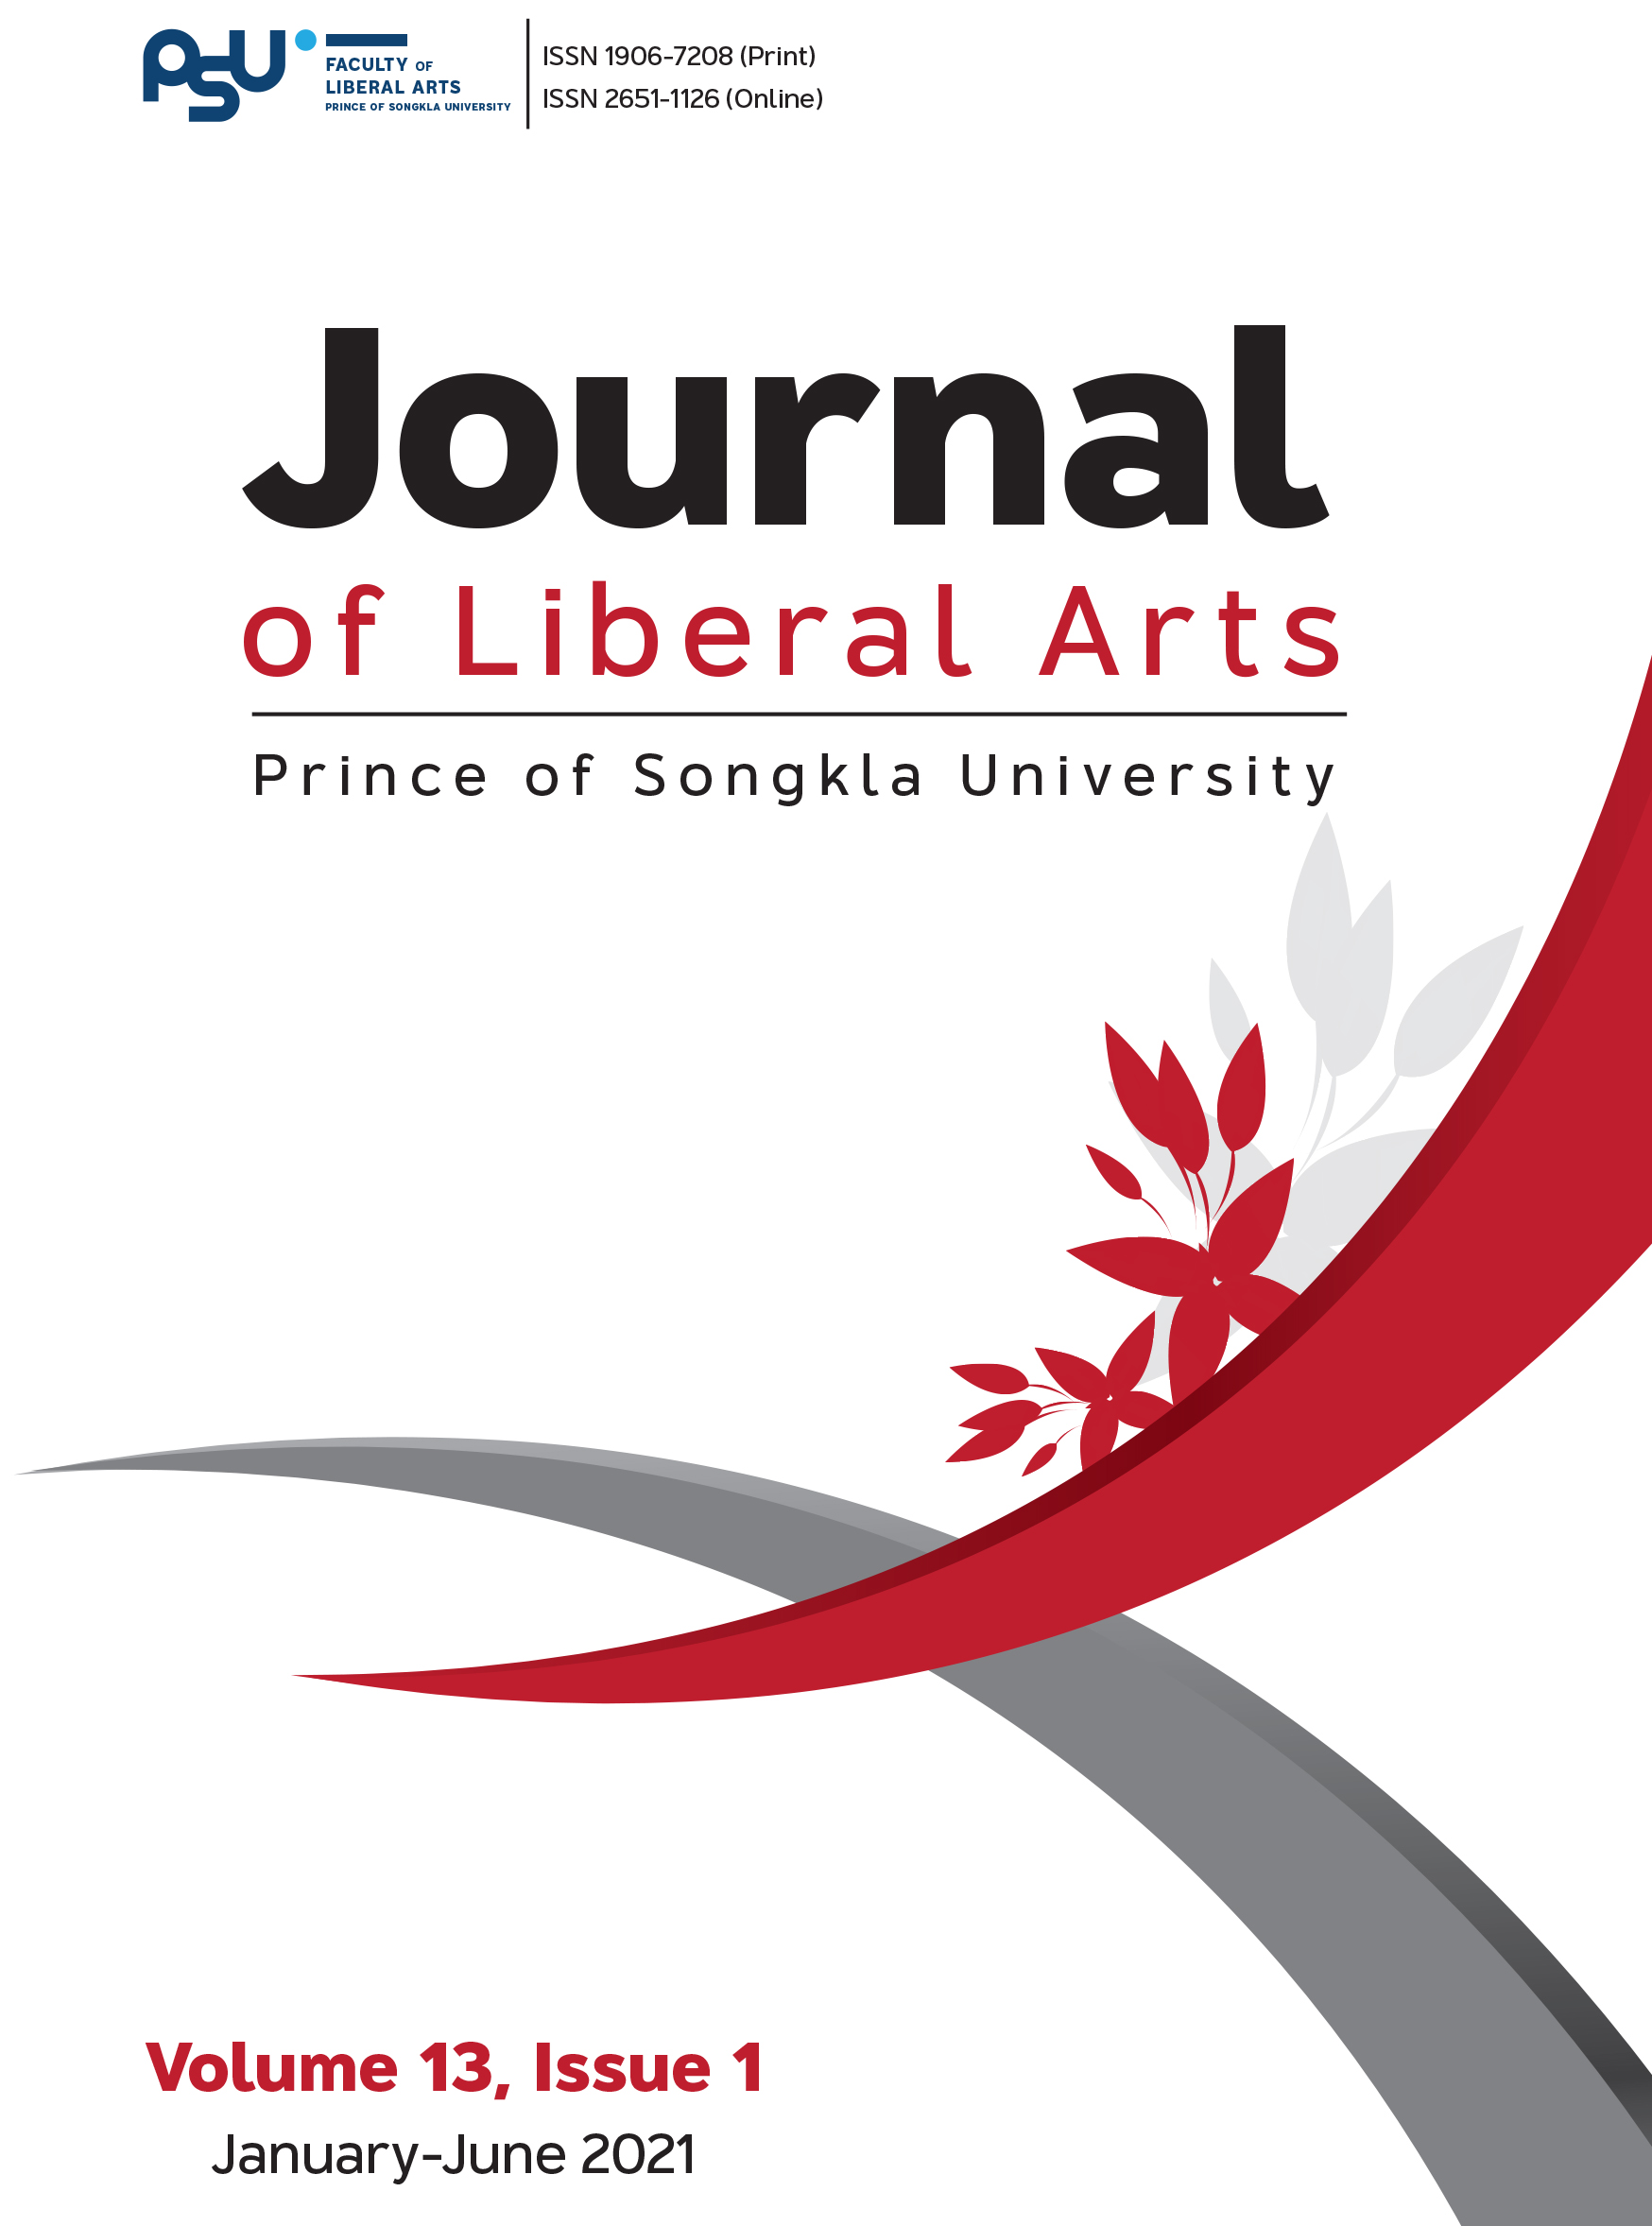 					View Vol. 13 No. 1 (2021): Journal of Liberal Arts , Prince of Songkla University
				